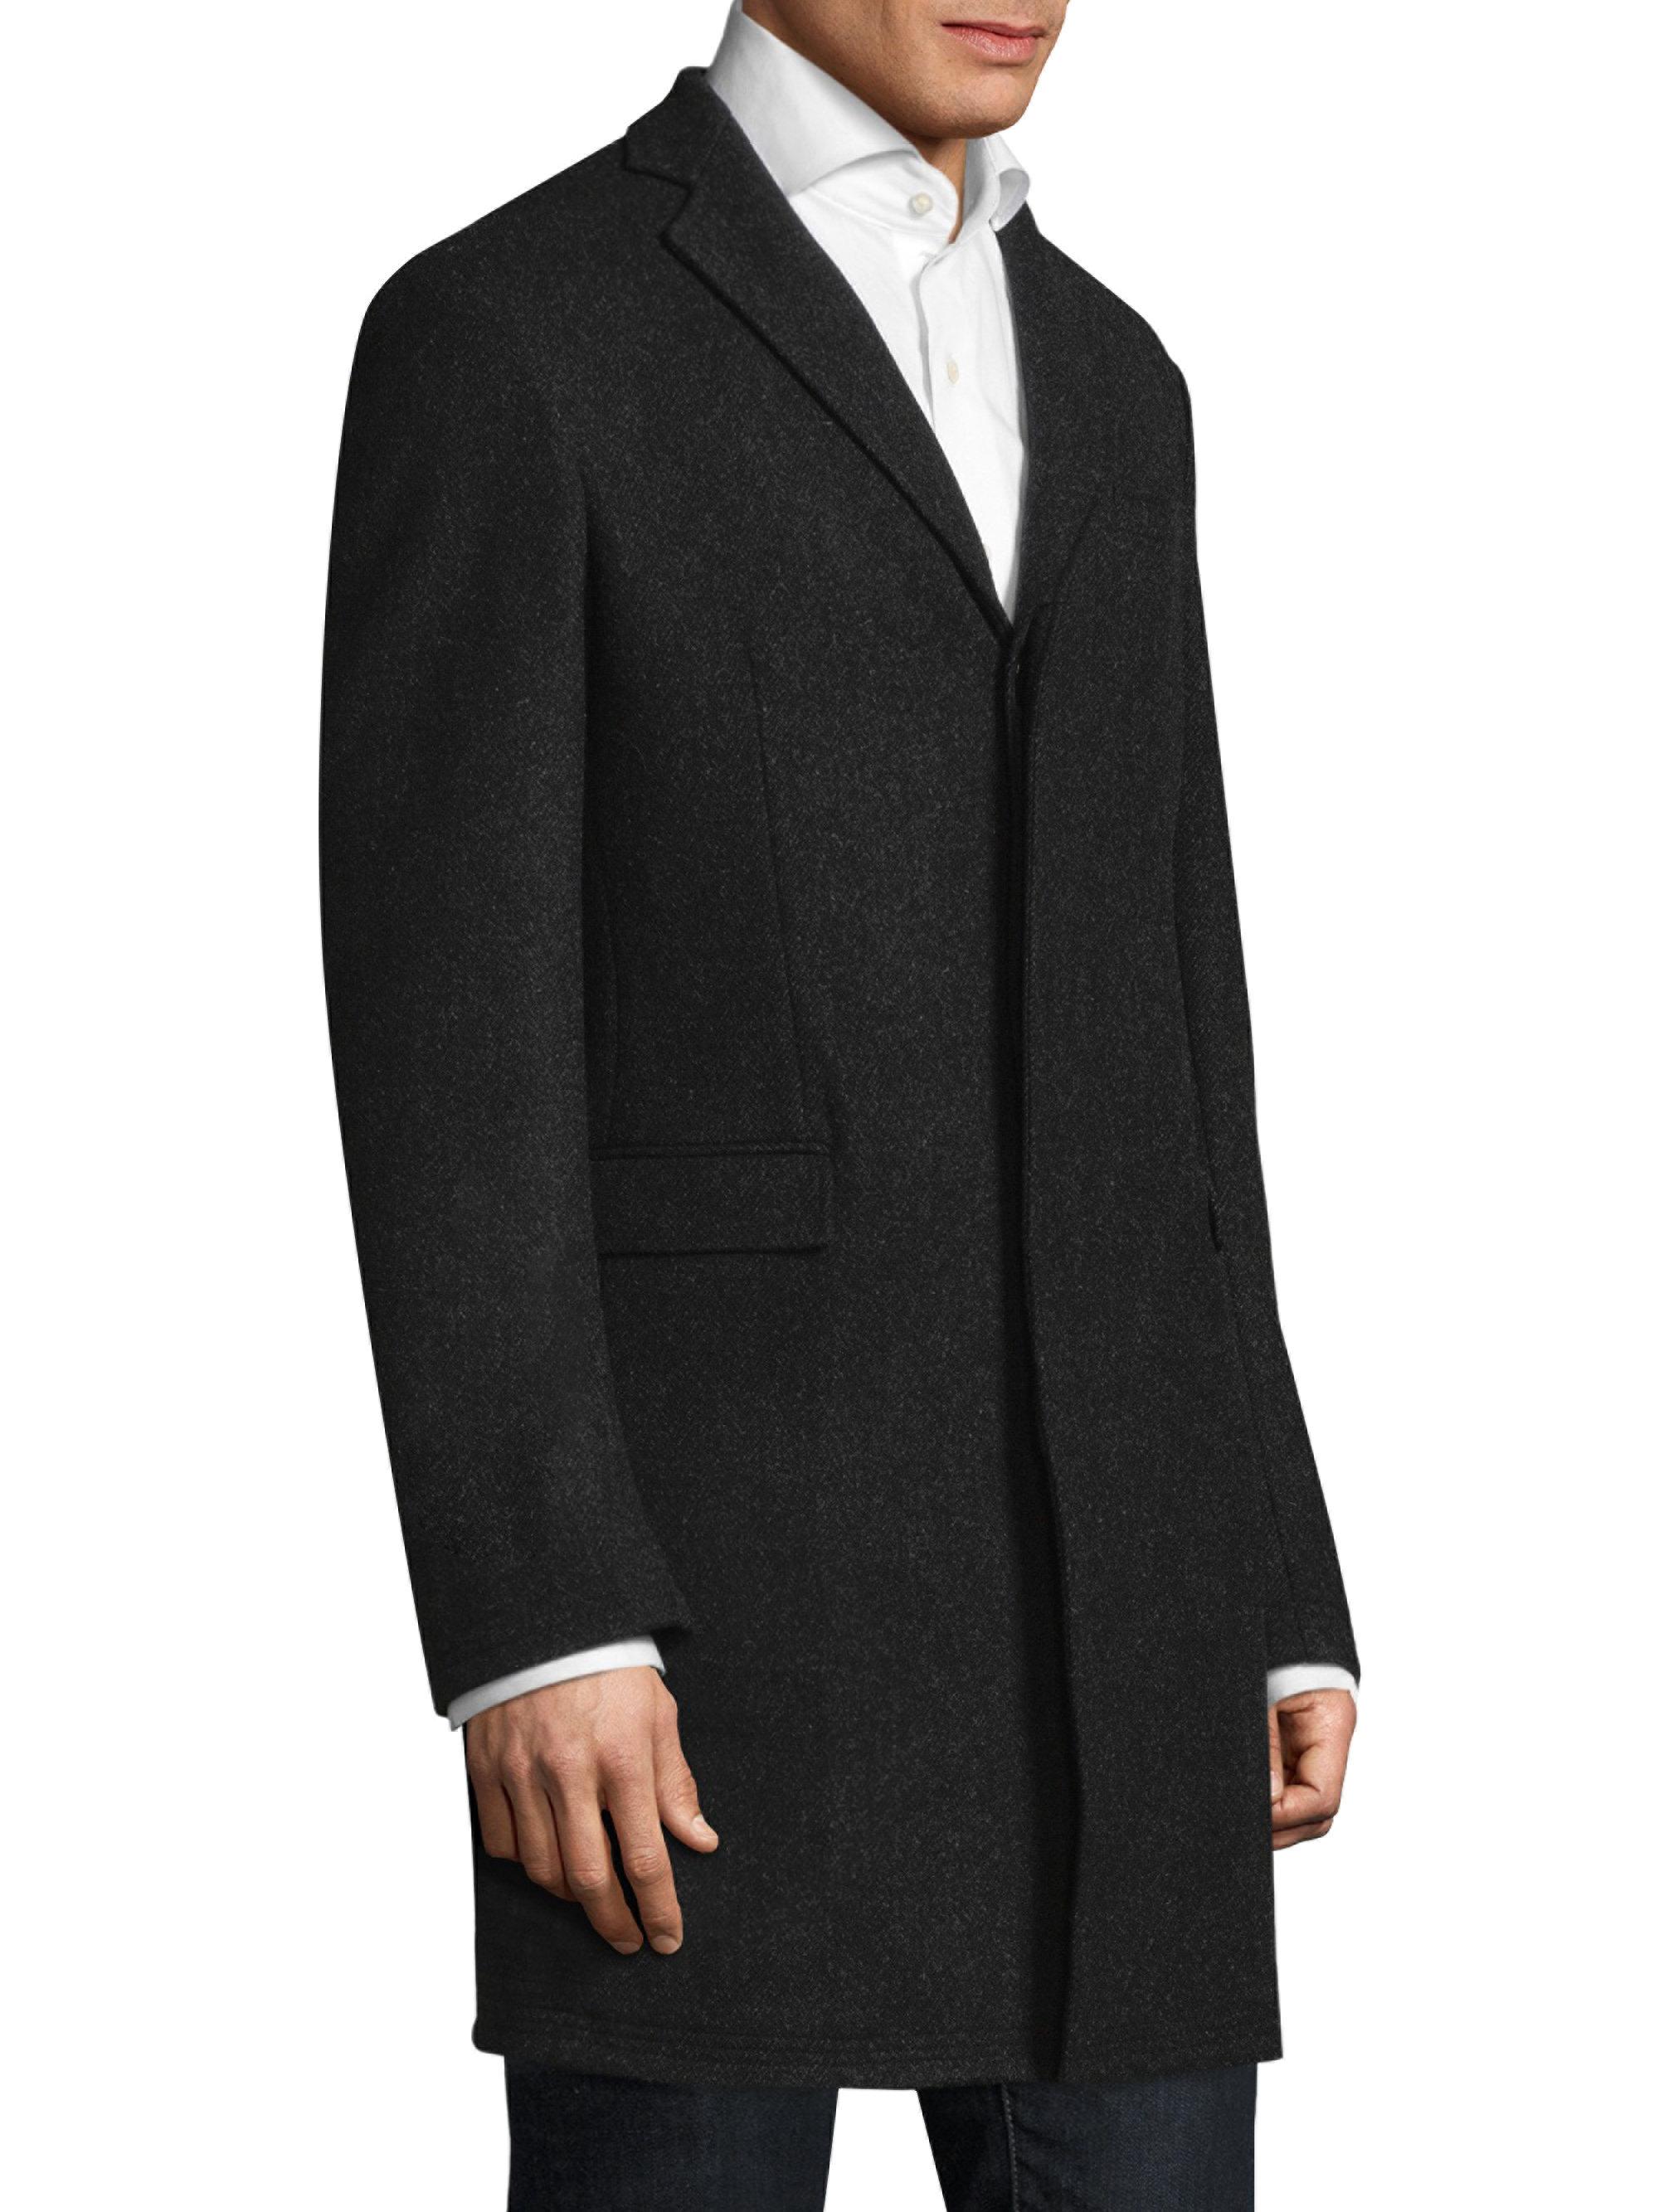 Polo Top Coat Outlet, SAVE 60% - thlaw.co.nz